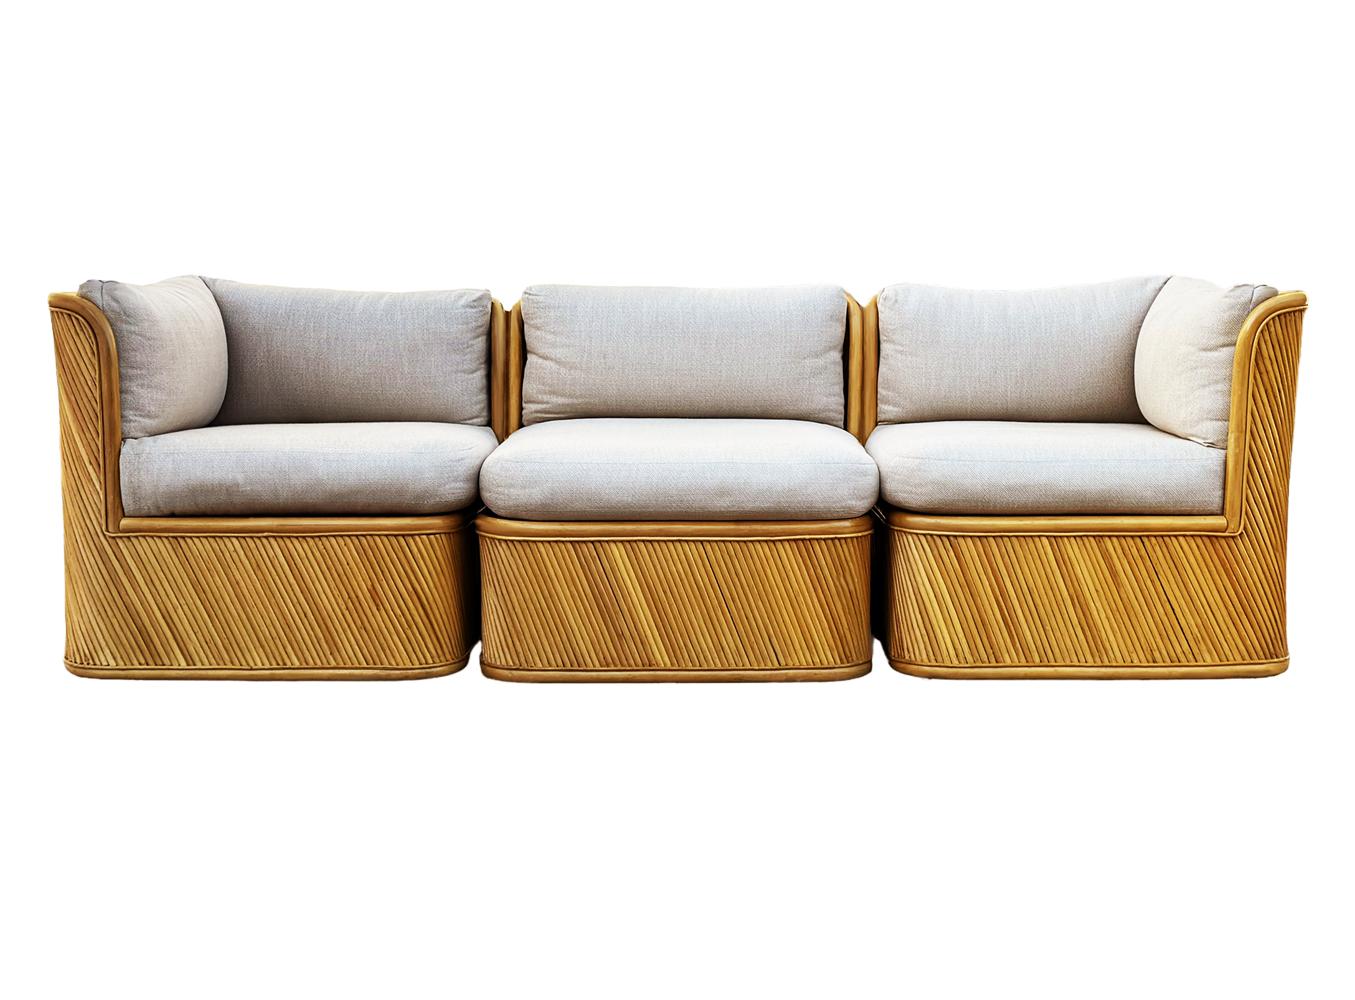 A handsome and sculptural sofa made by Comfort Design Furniture in the 1970's. The sofa features nice heavy construction with a sculptural design & bamboo reed clad. Cushions were recently recovered and in very good condition. Ready for immediate